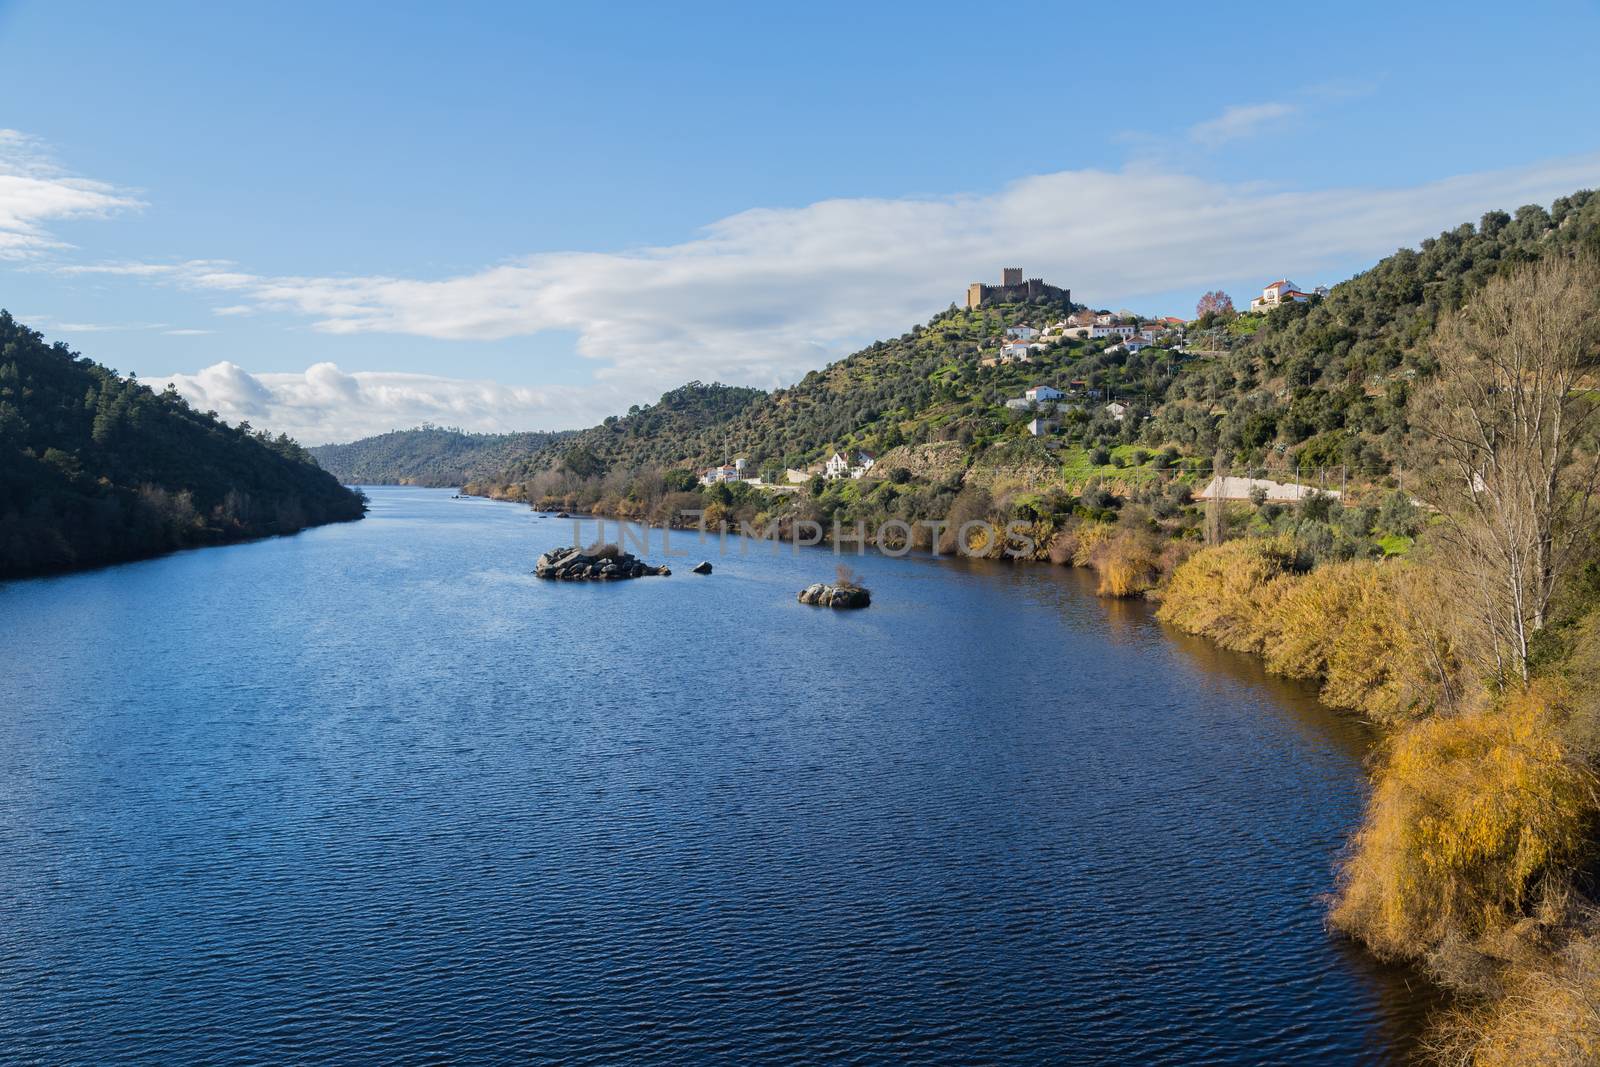 View of the Belver Castle (Castelo de Belver) and village from the middle of the Tagus River in Portugal; Concept for travel in Portugal